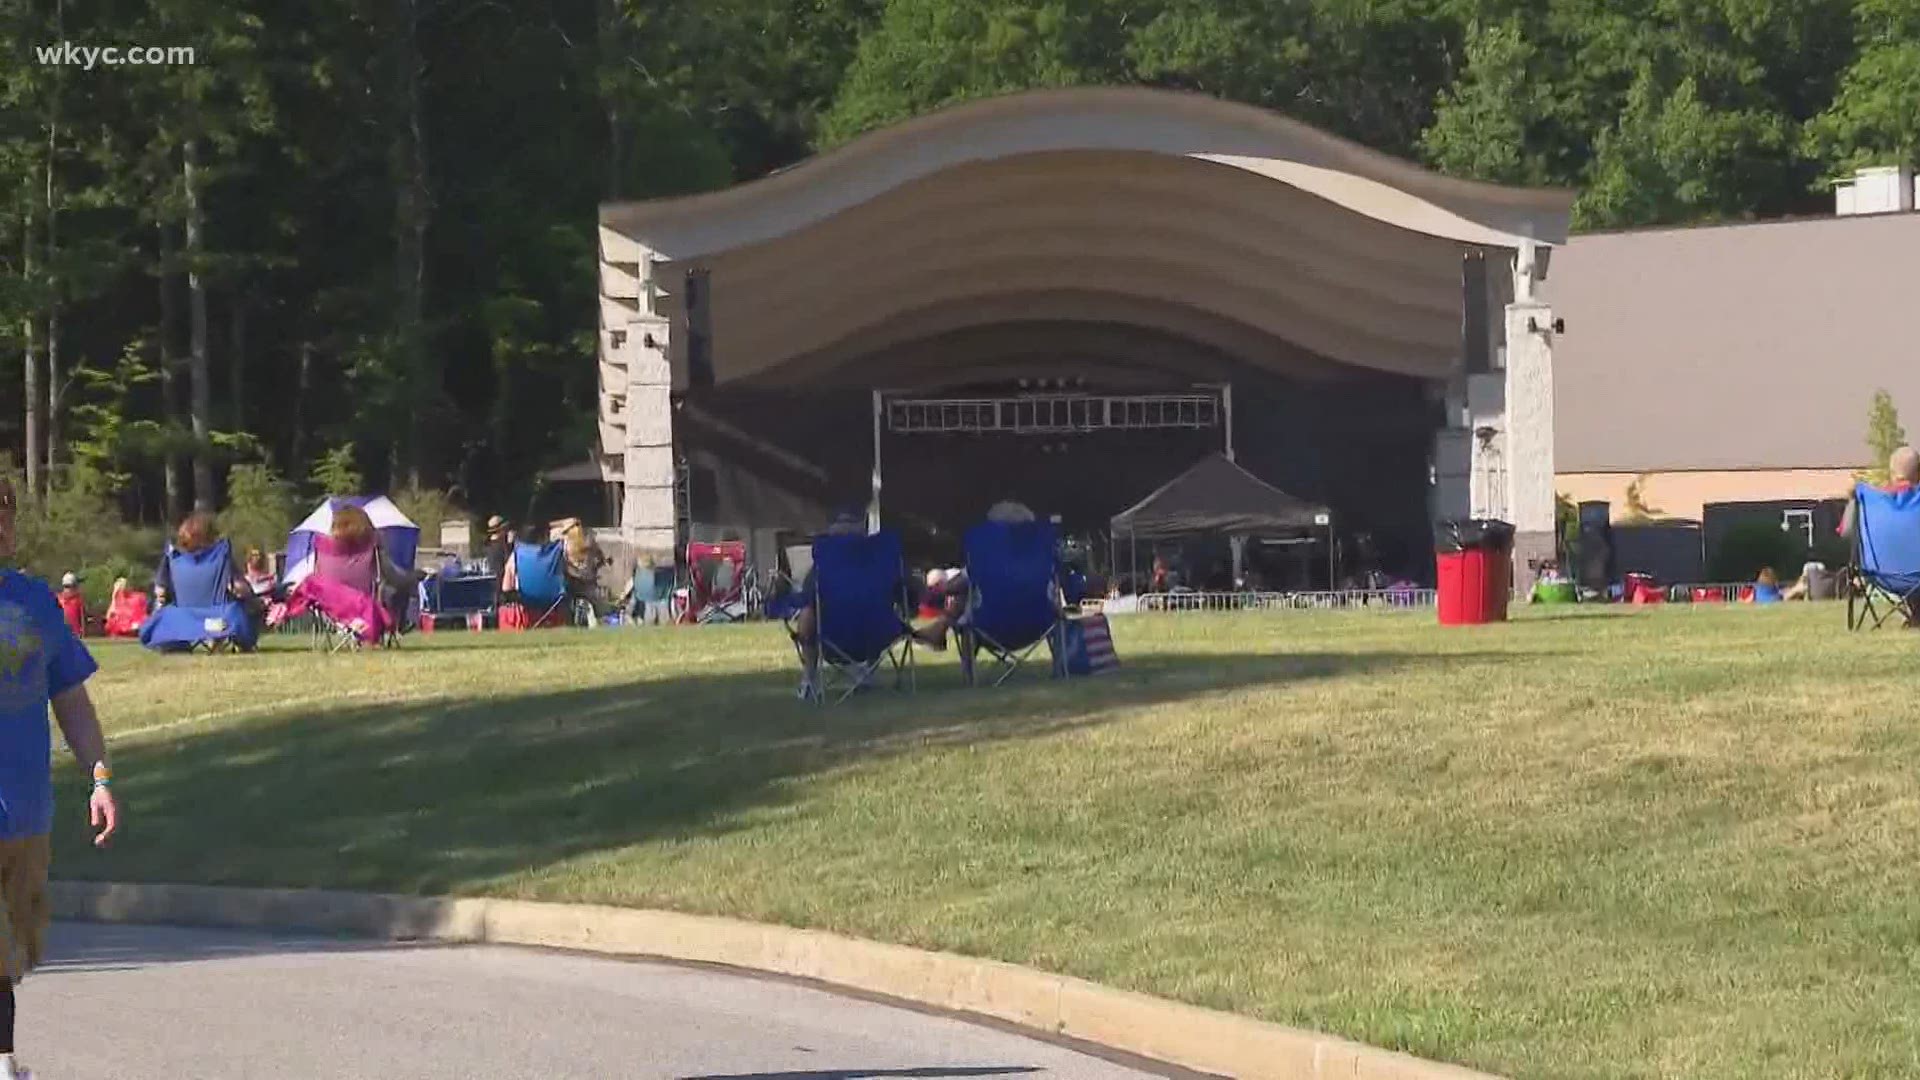 Mentor Amphitheater Schedule 2022 Mentor Kicks Off Summer Concert Series With Added Safety Measures | Wkyc.com